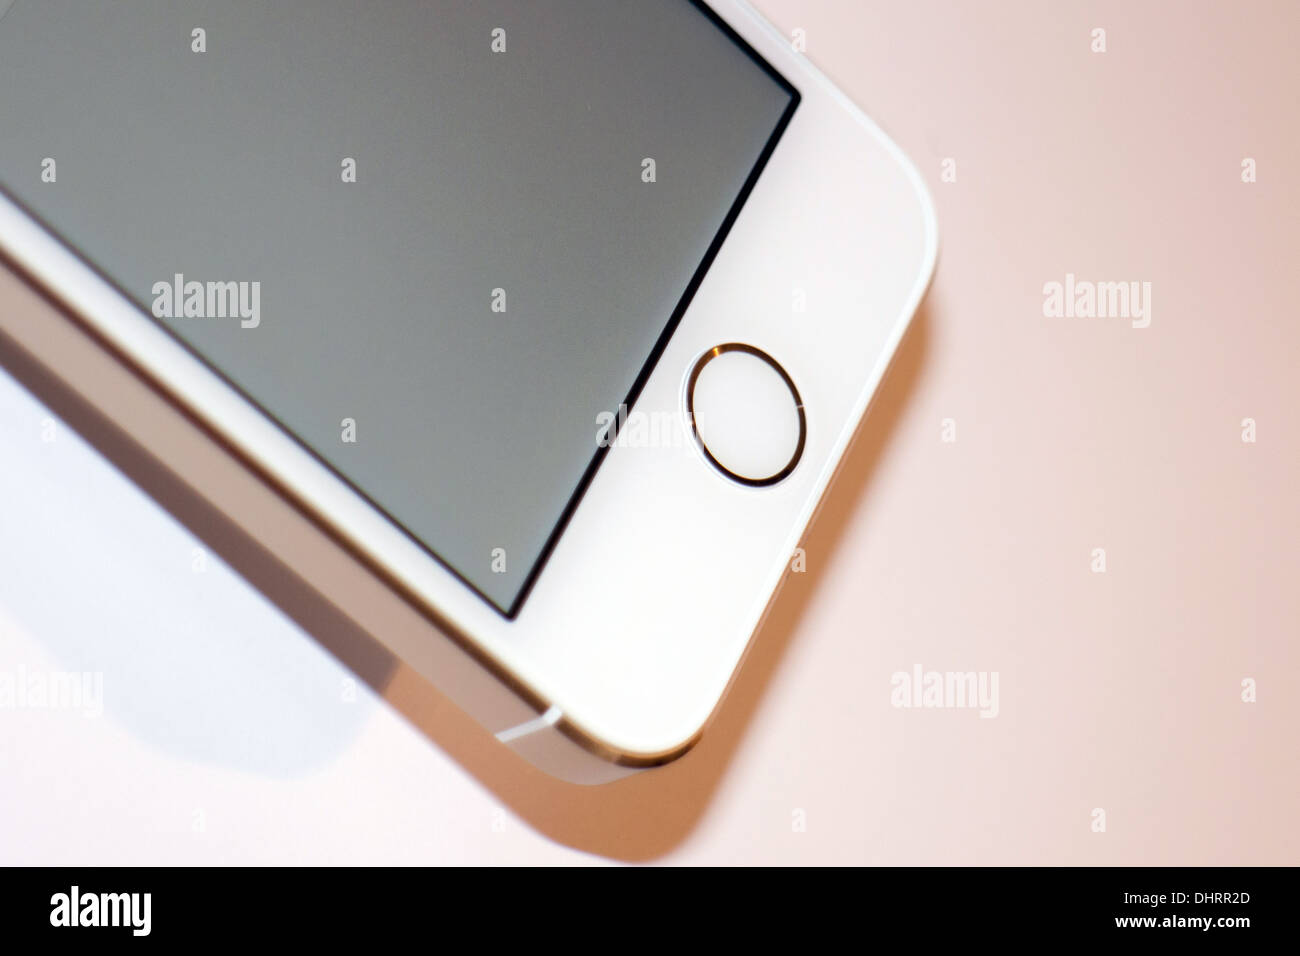 Apple iPhone 5 s Gold Touch ID 3 Stockfoto